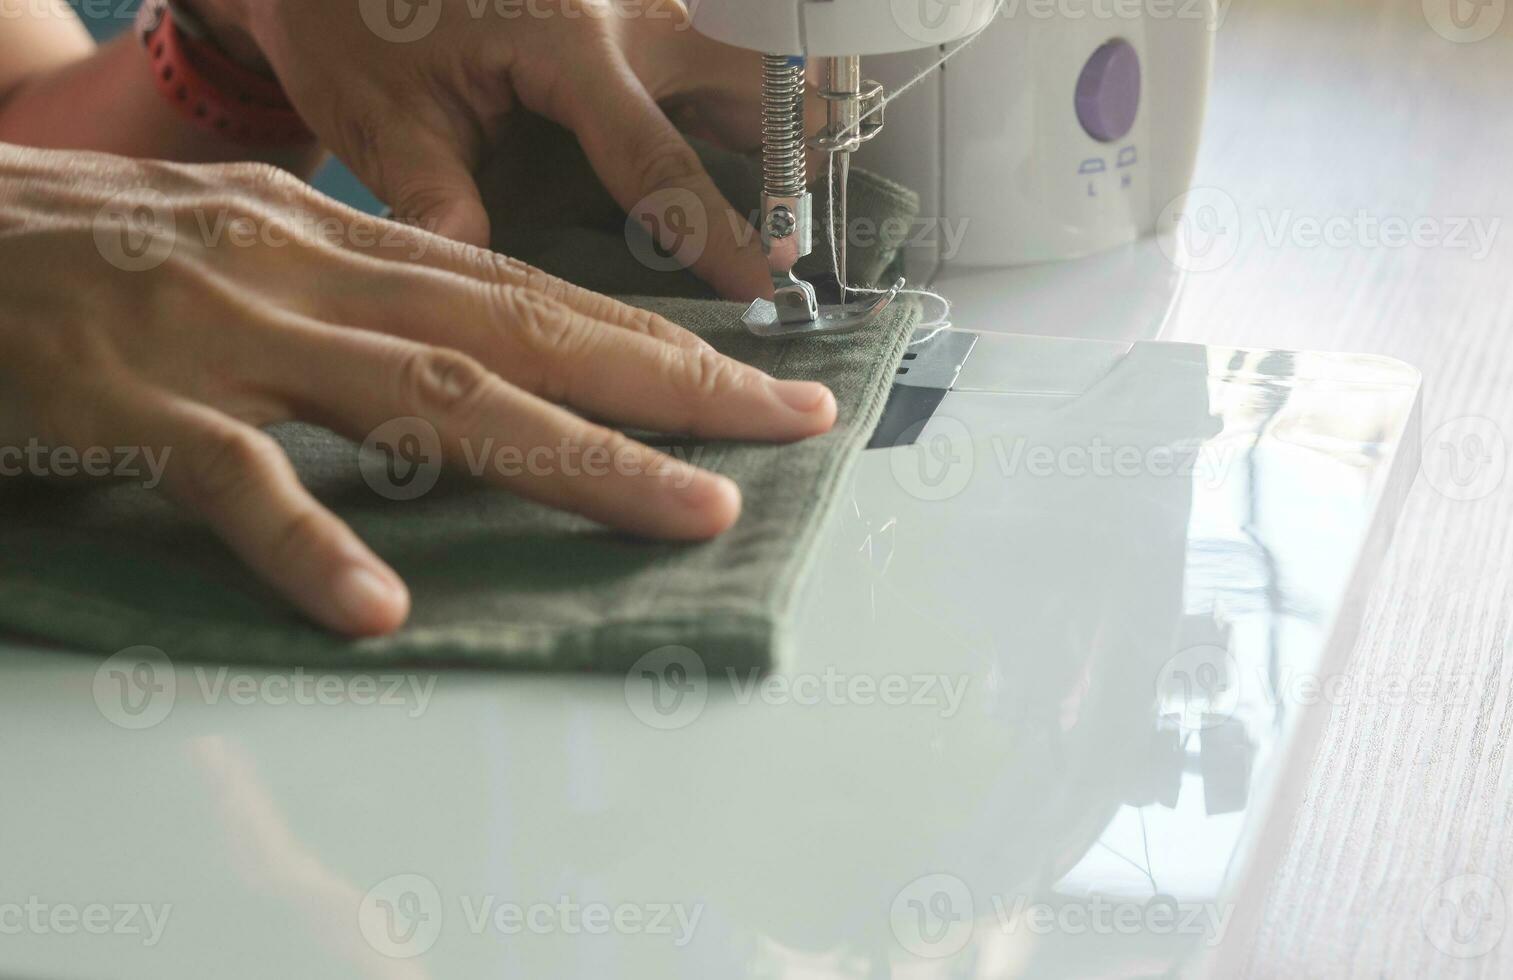 woman mid-adult sitting on chair and repairing clothes using sewing machine working on holiday hobby at home,hand made clothes fasion designer lifestyle concepts photo